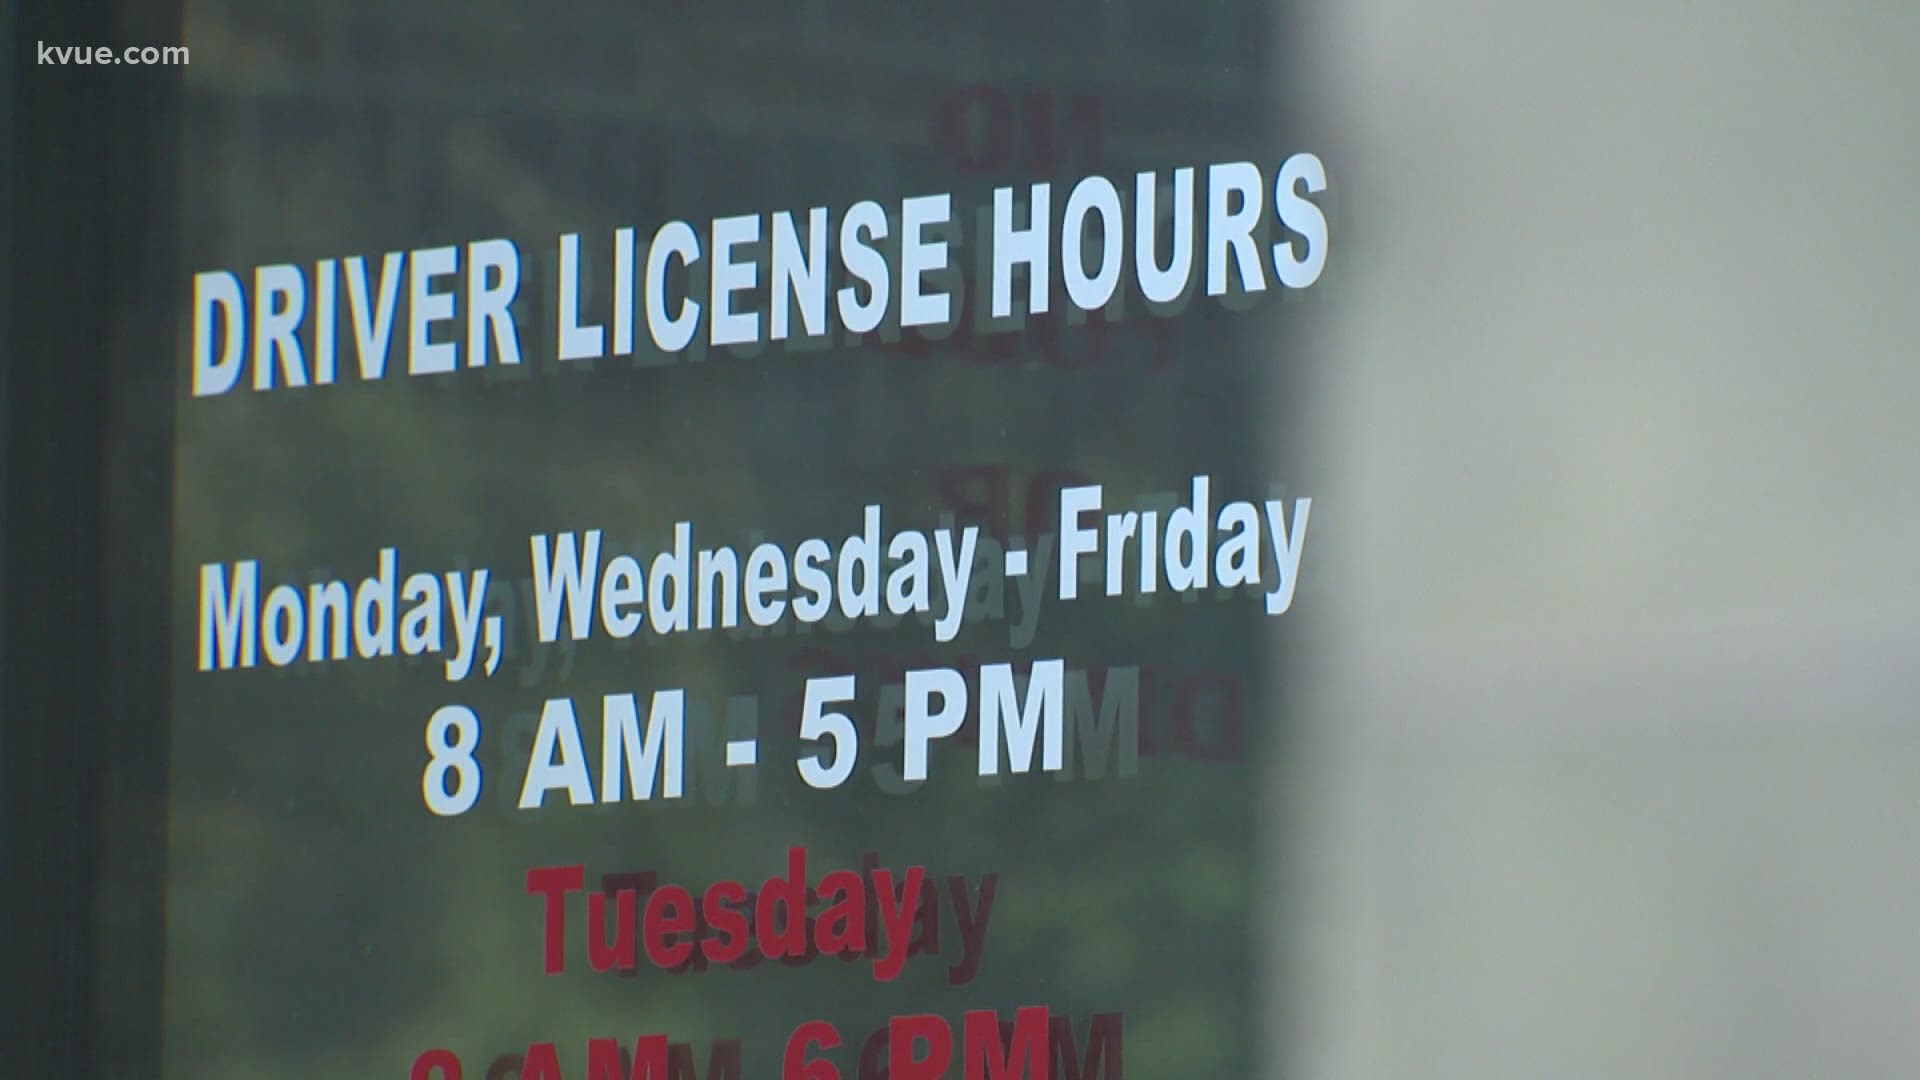 You may have to wait until early next year to get an appointment at the driver's license office.